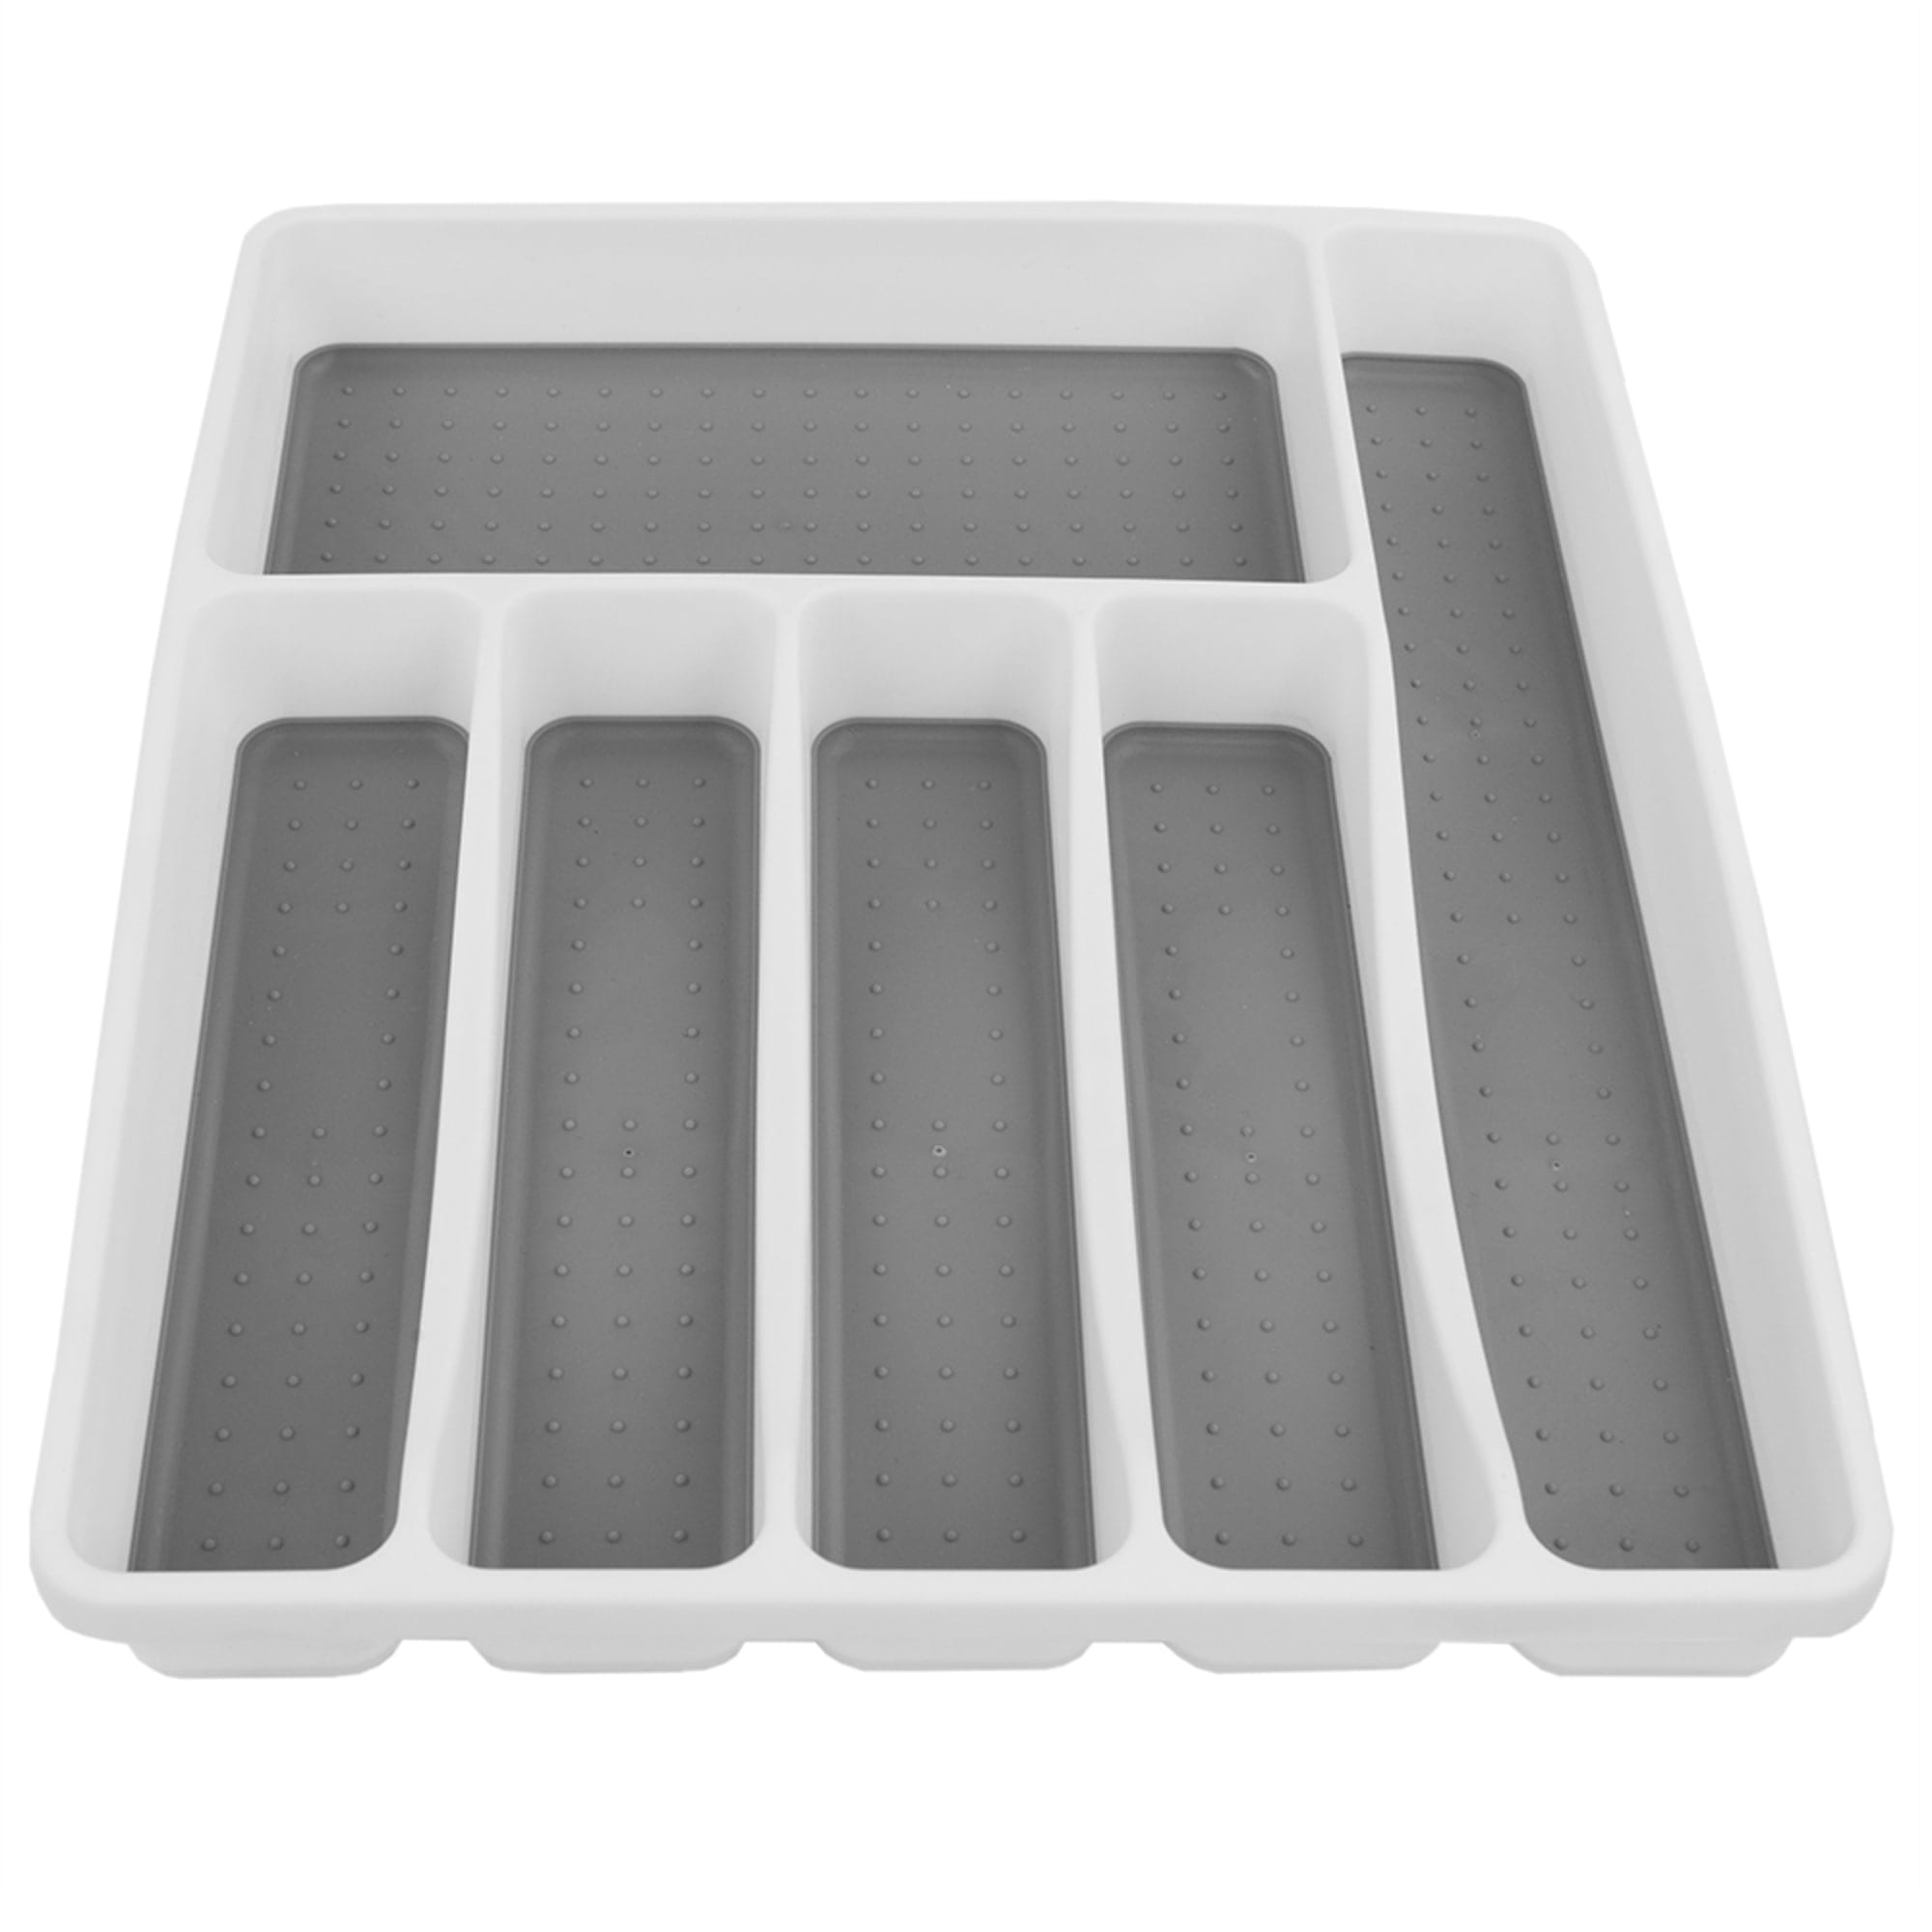 Home Basics Large Cutlery Tray with Rubber Lined Compartments, White $6.00 EACH, CASE PACK OF 12